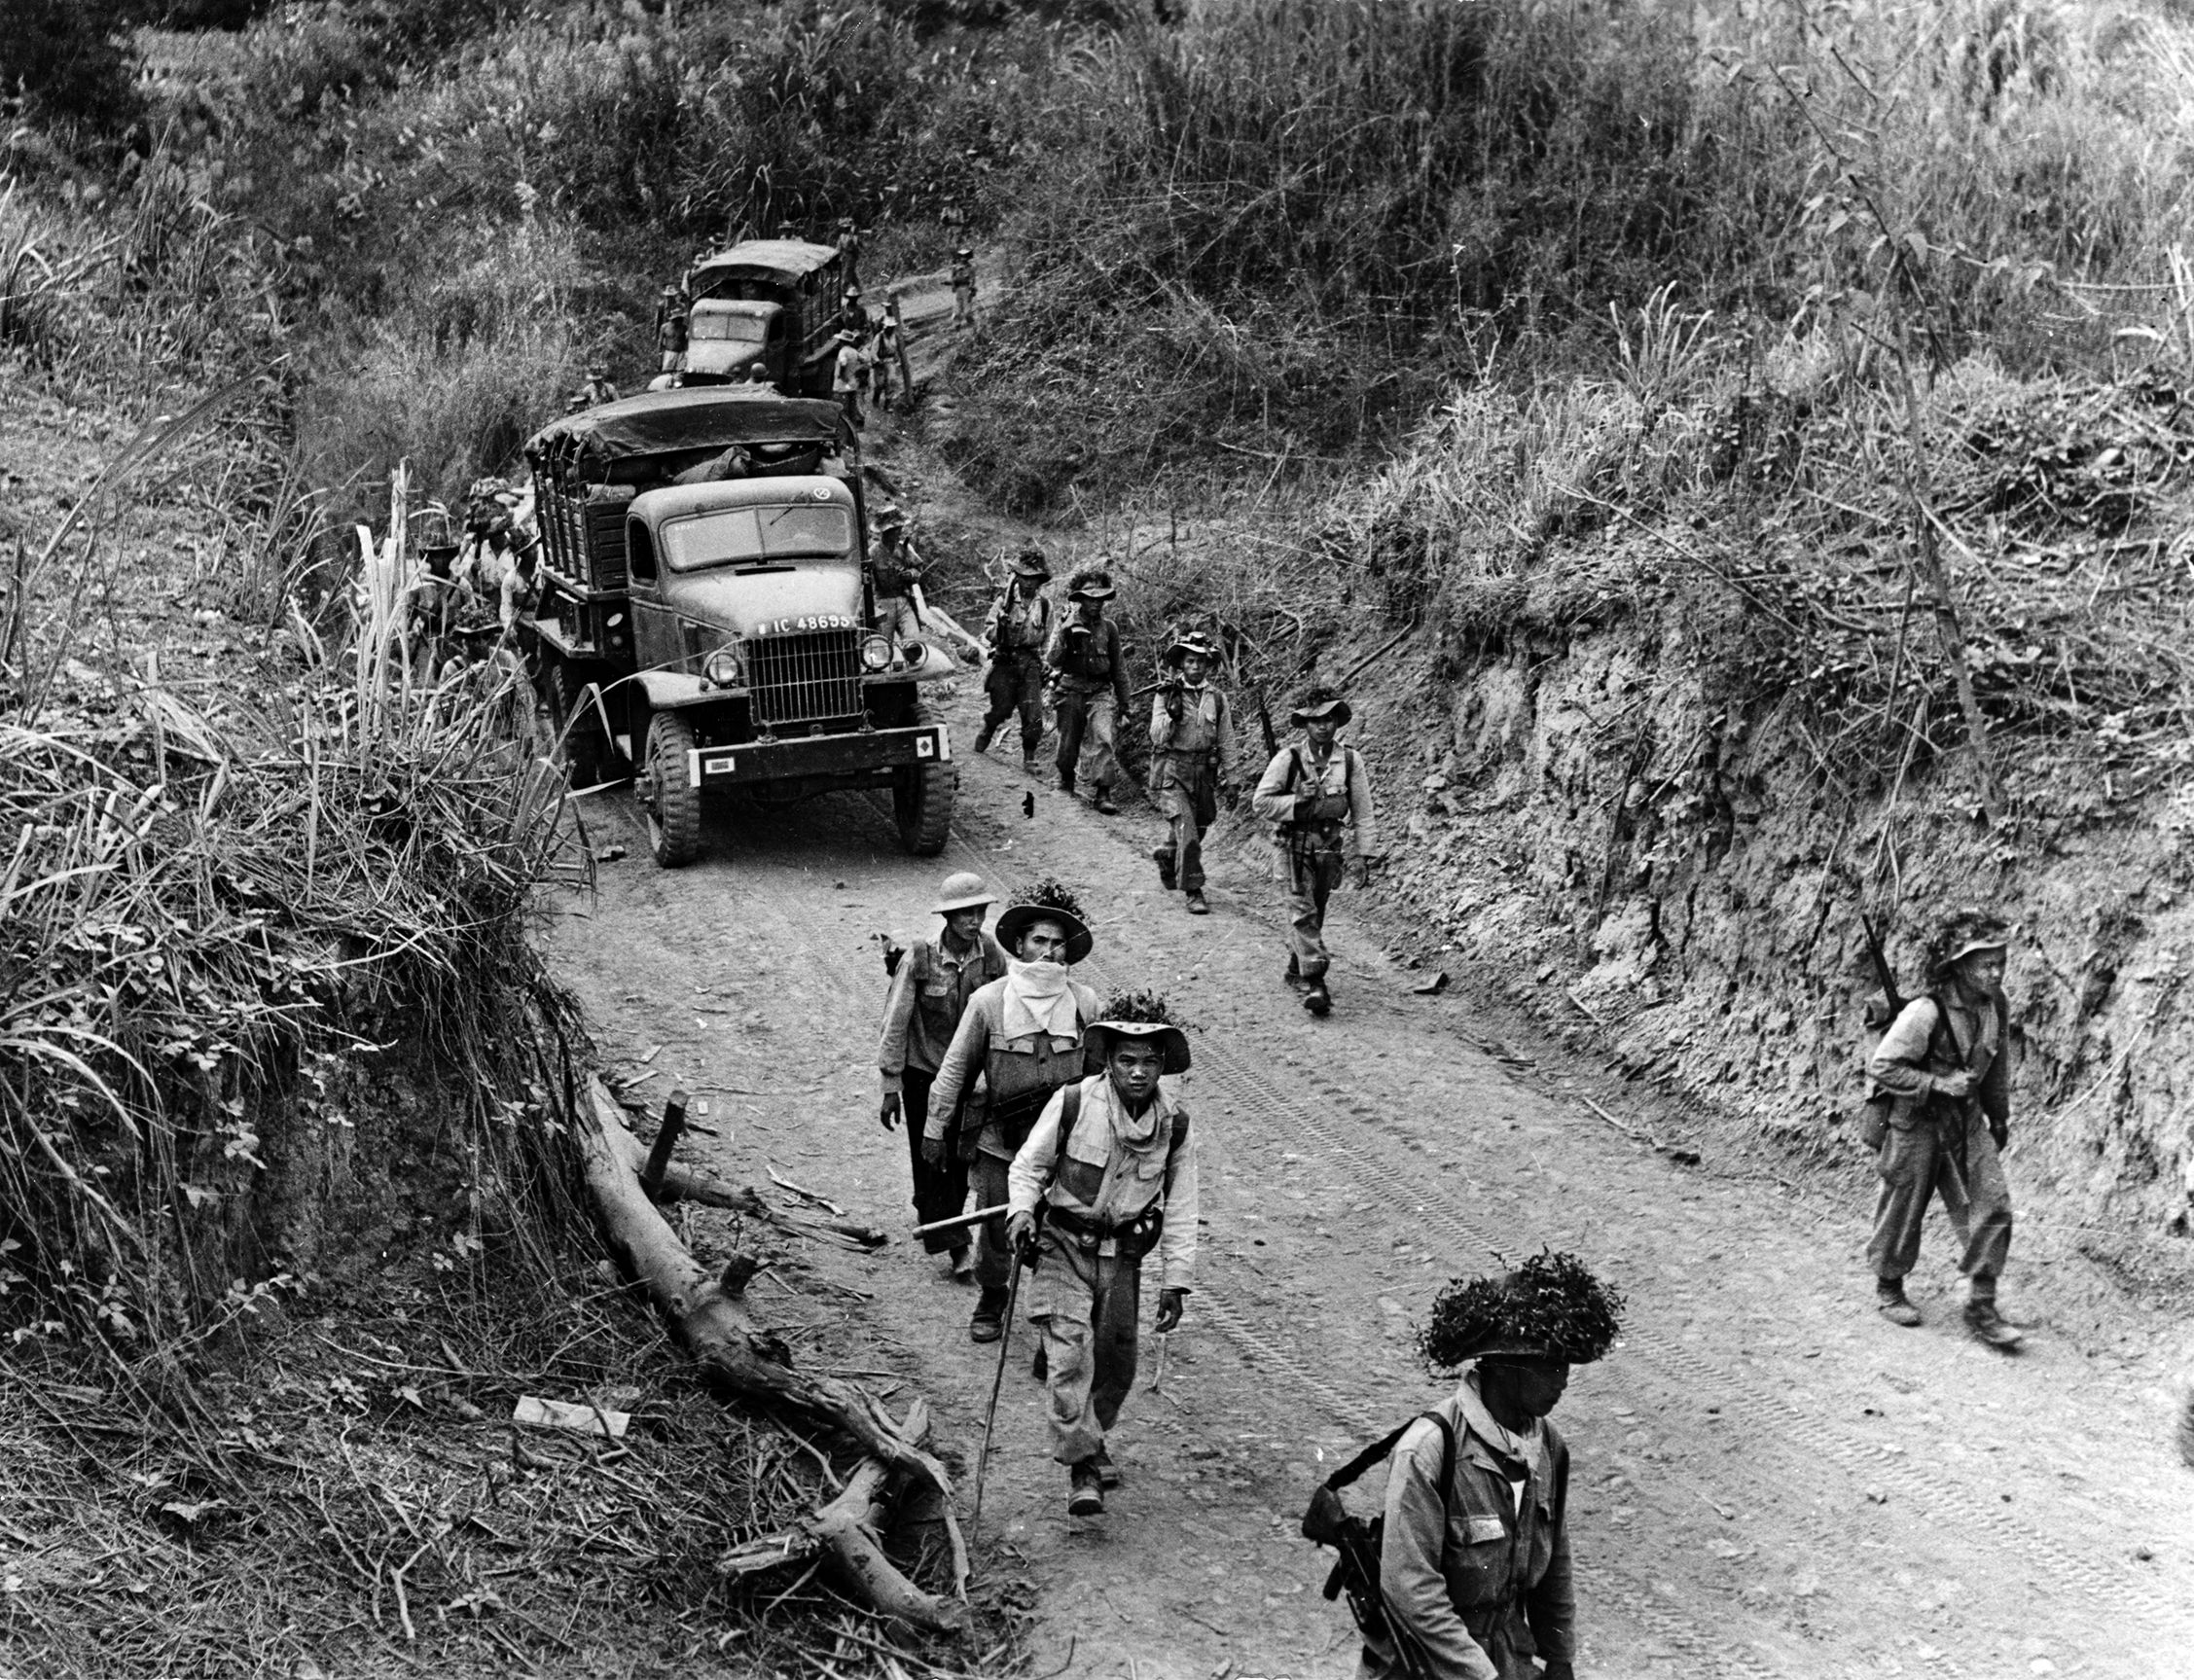 Troops and equipment make their way across the delta near Phu Doan at the intersection of the Chay and Clear rivers in January 1953.